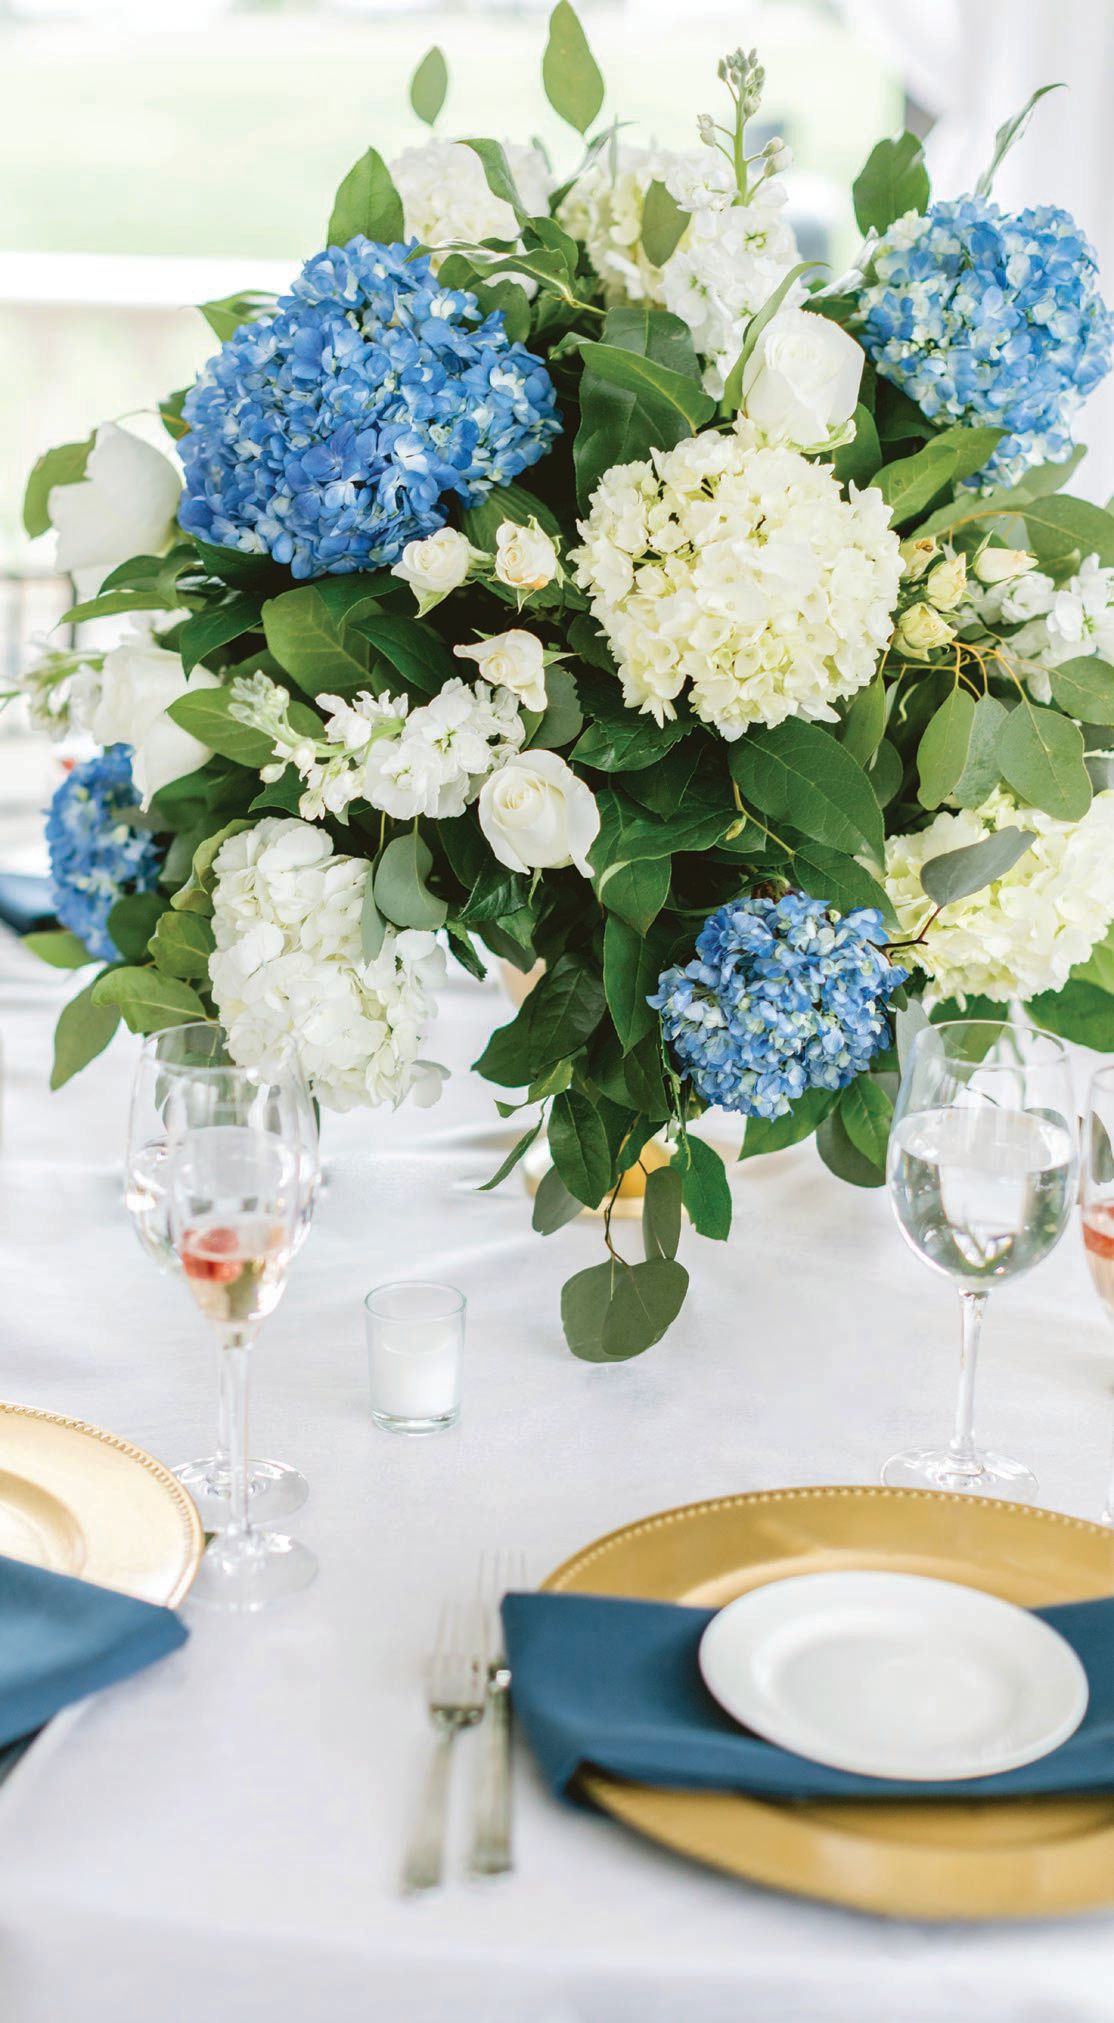 Blue hydrangea adds a pop of color without stealing the spotlight in this centerpiece by Beautiful Blooms. PHOTO BY EMILY WREN PHOTOGRAPHY